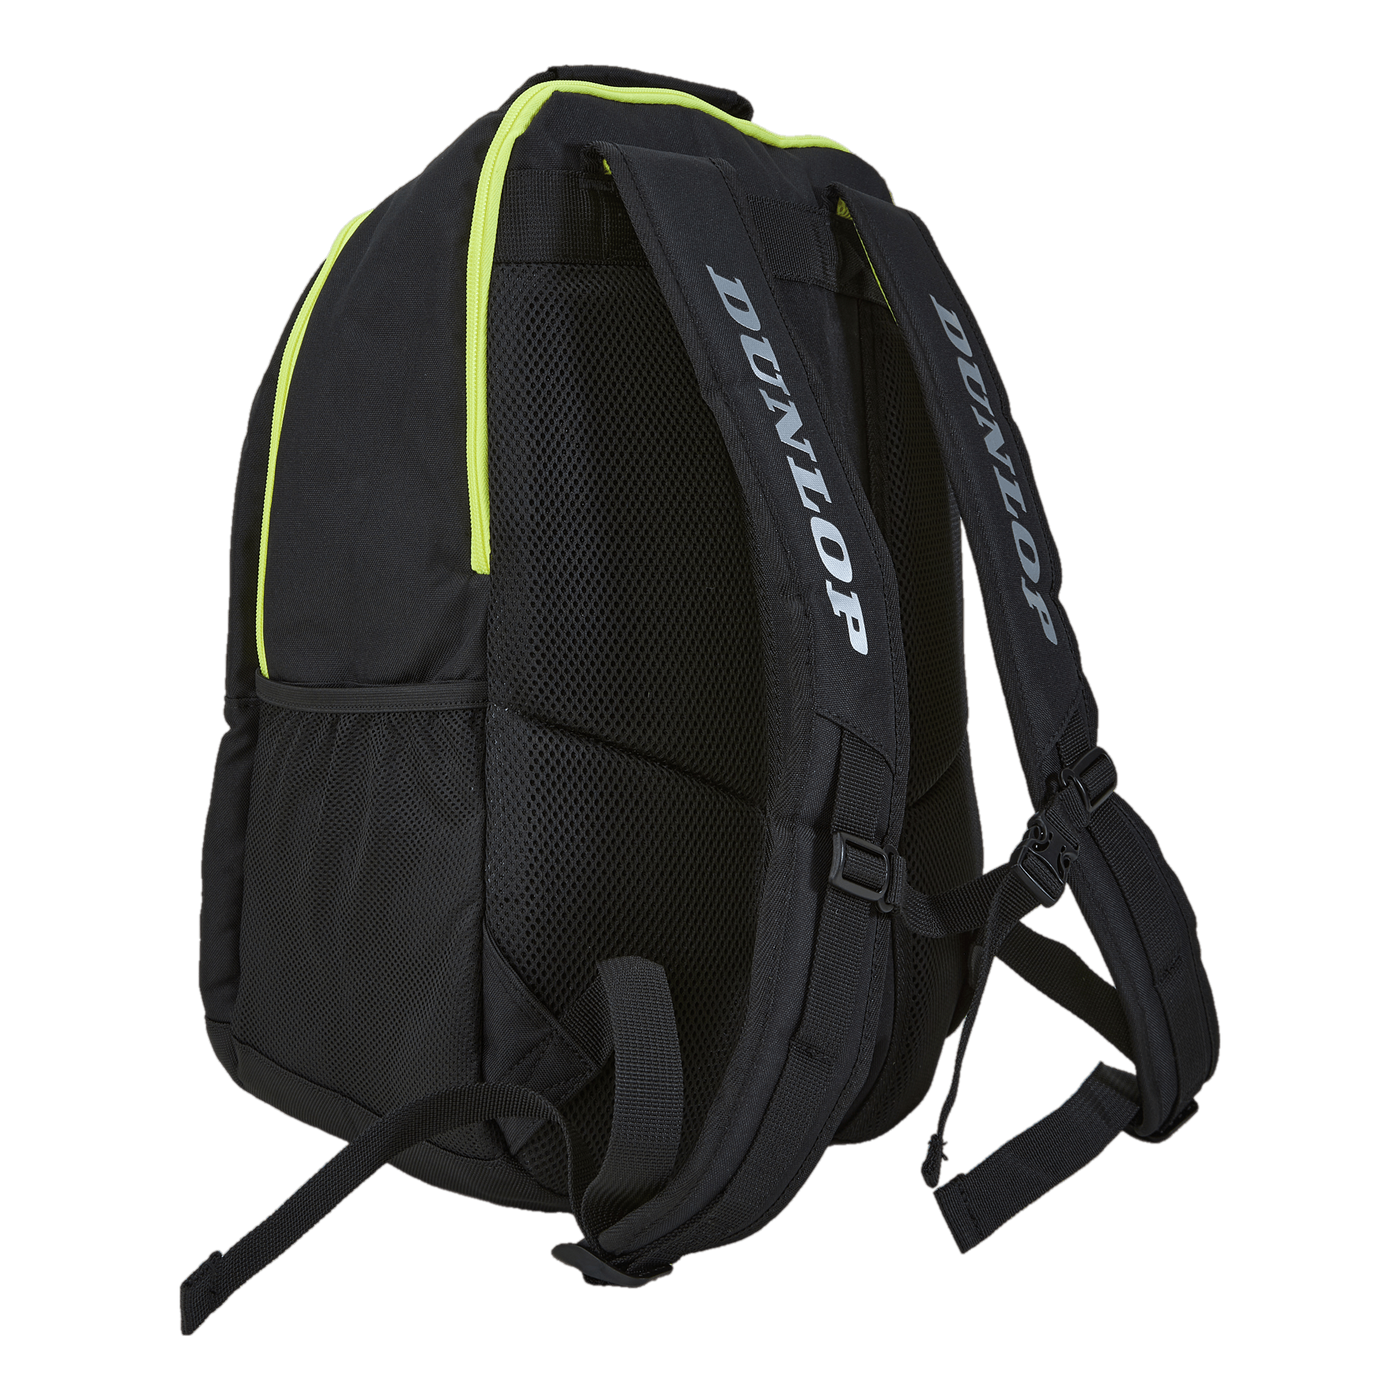 Sx Performance Backpack Black/yellow